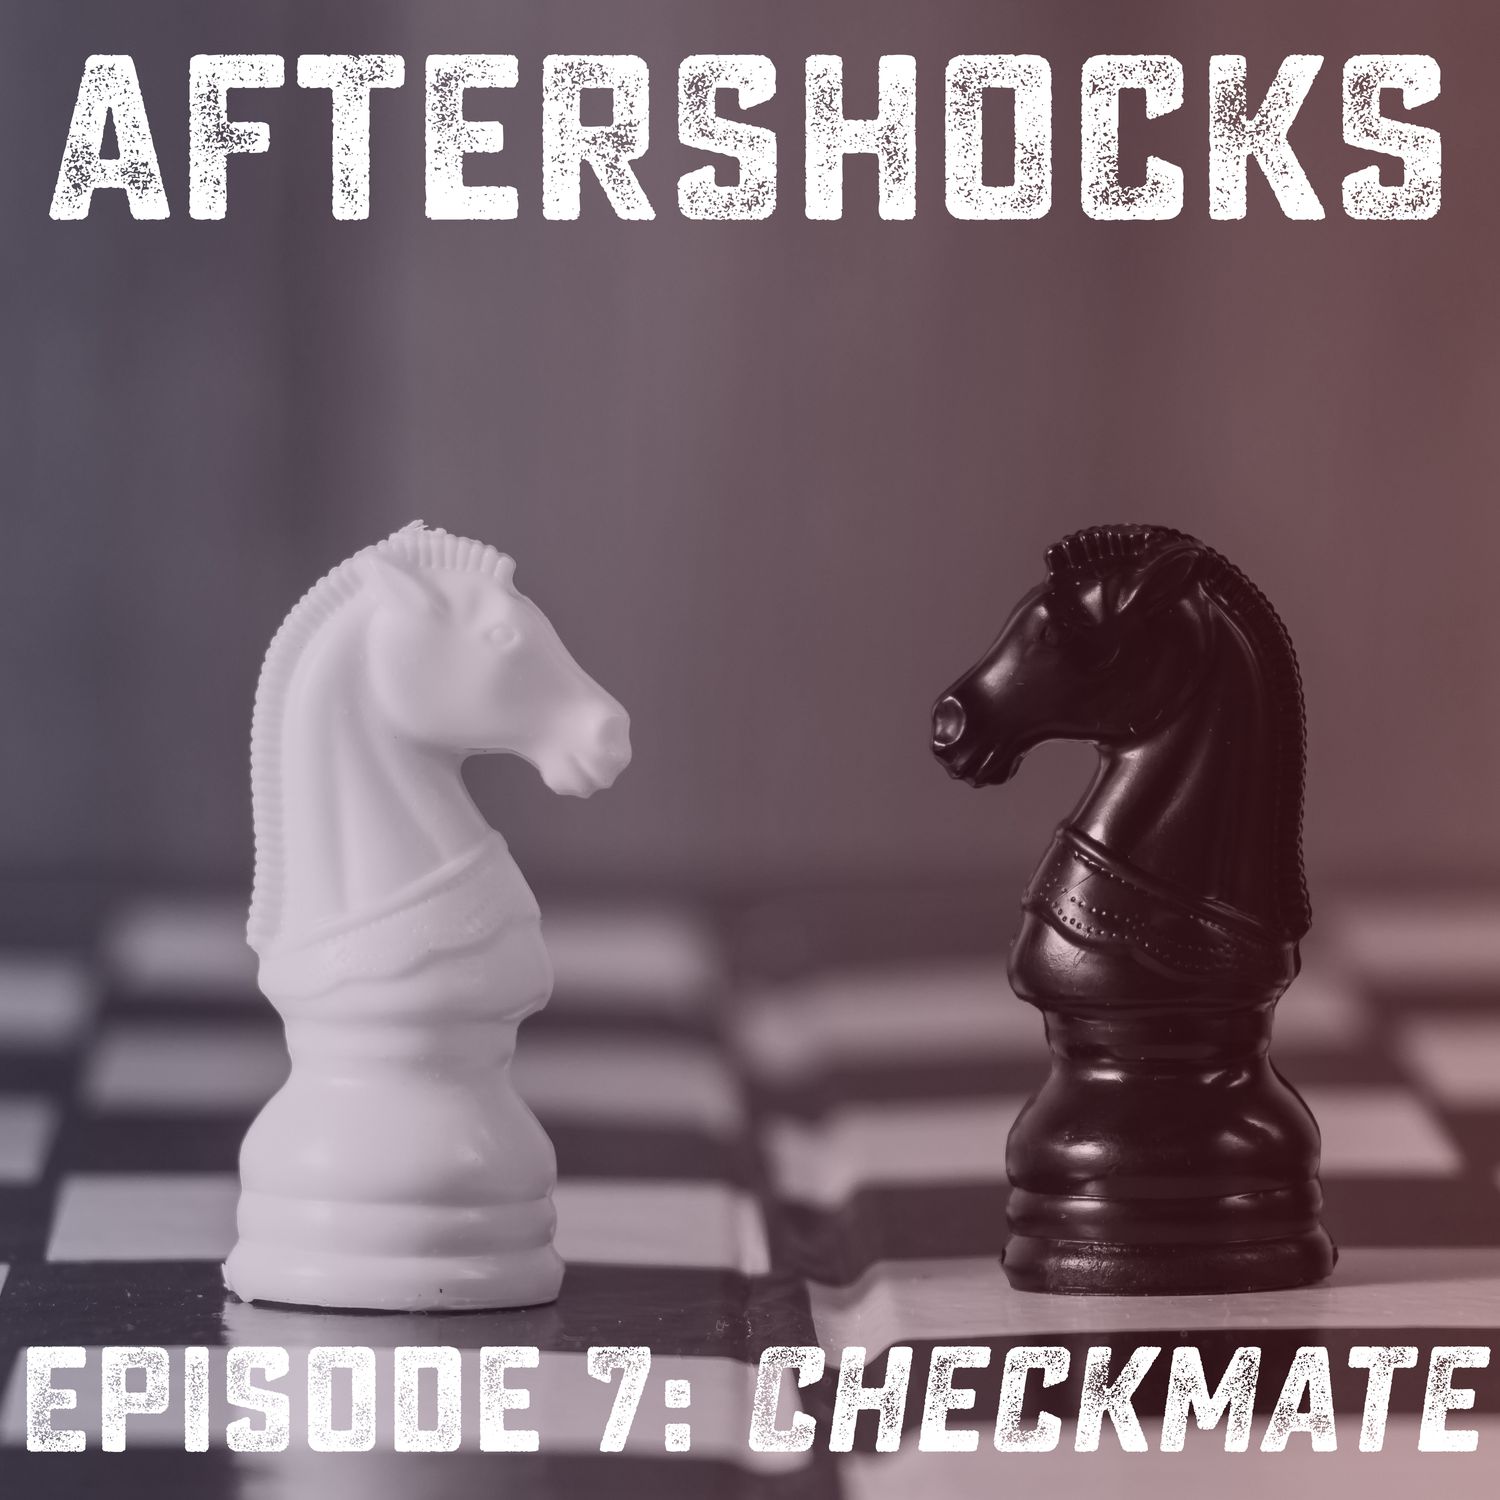 1.07: Checkmate